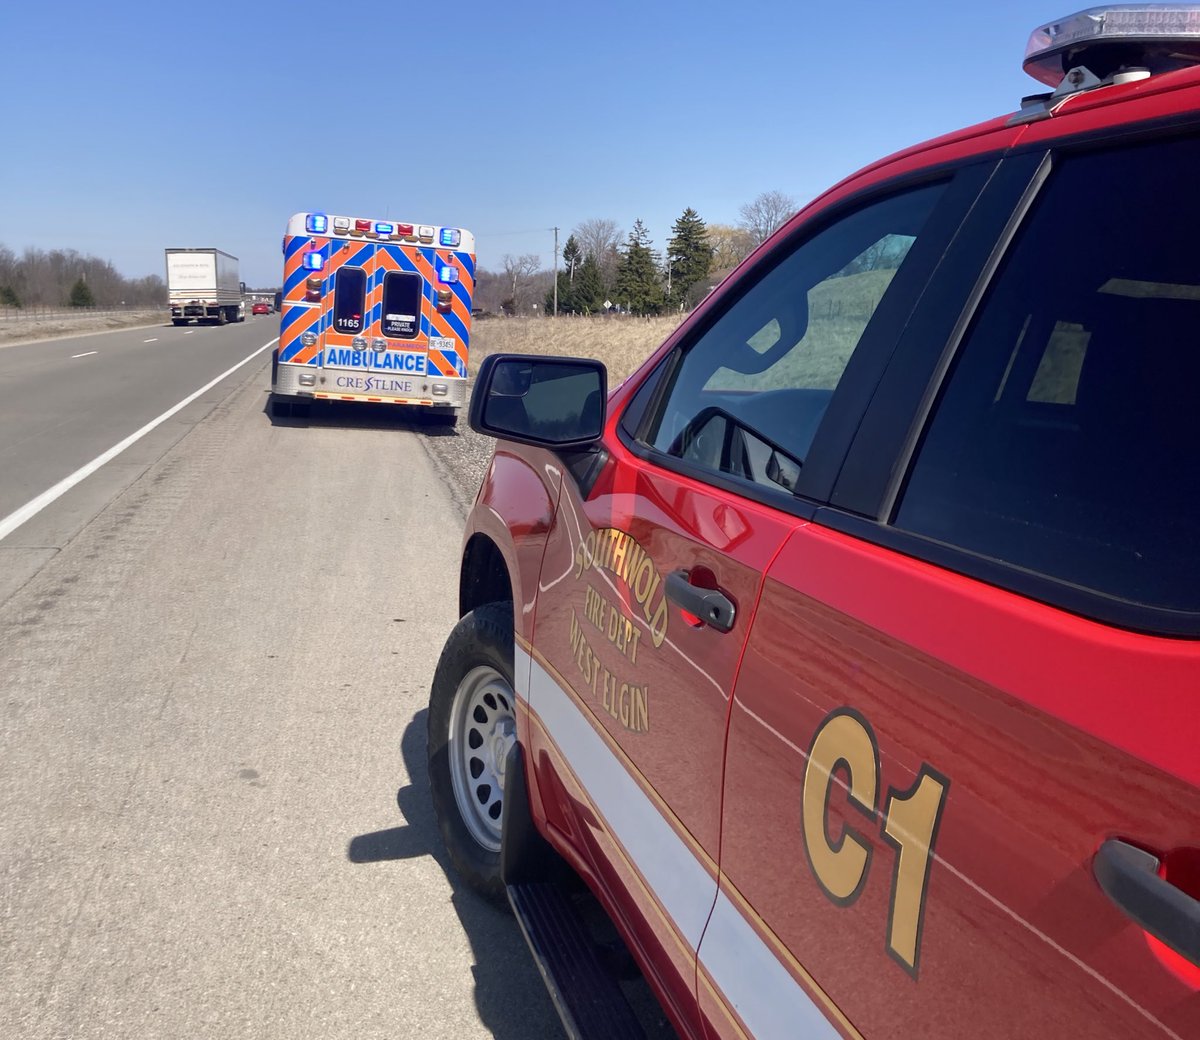 @SouthwoldFire responded to #Hwy401 EB 171 for a single vehicle MVC. 1 patient was transported by @MedavieElginEMS with unknown injuries. @OPP_WR remain on scene. Please watch for slow/stopped traffic in all areas of @TwpofSouthwold as #SolarEclipse2024 traffic leaves the area